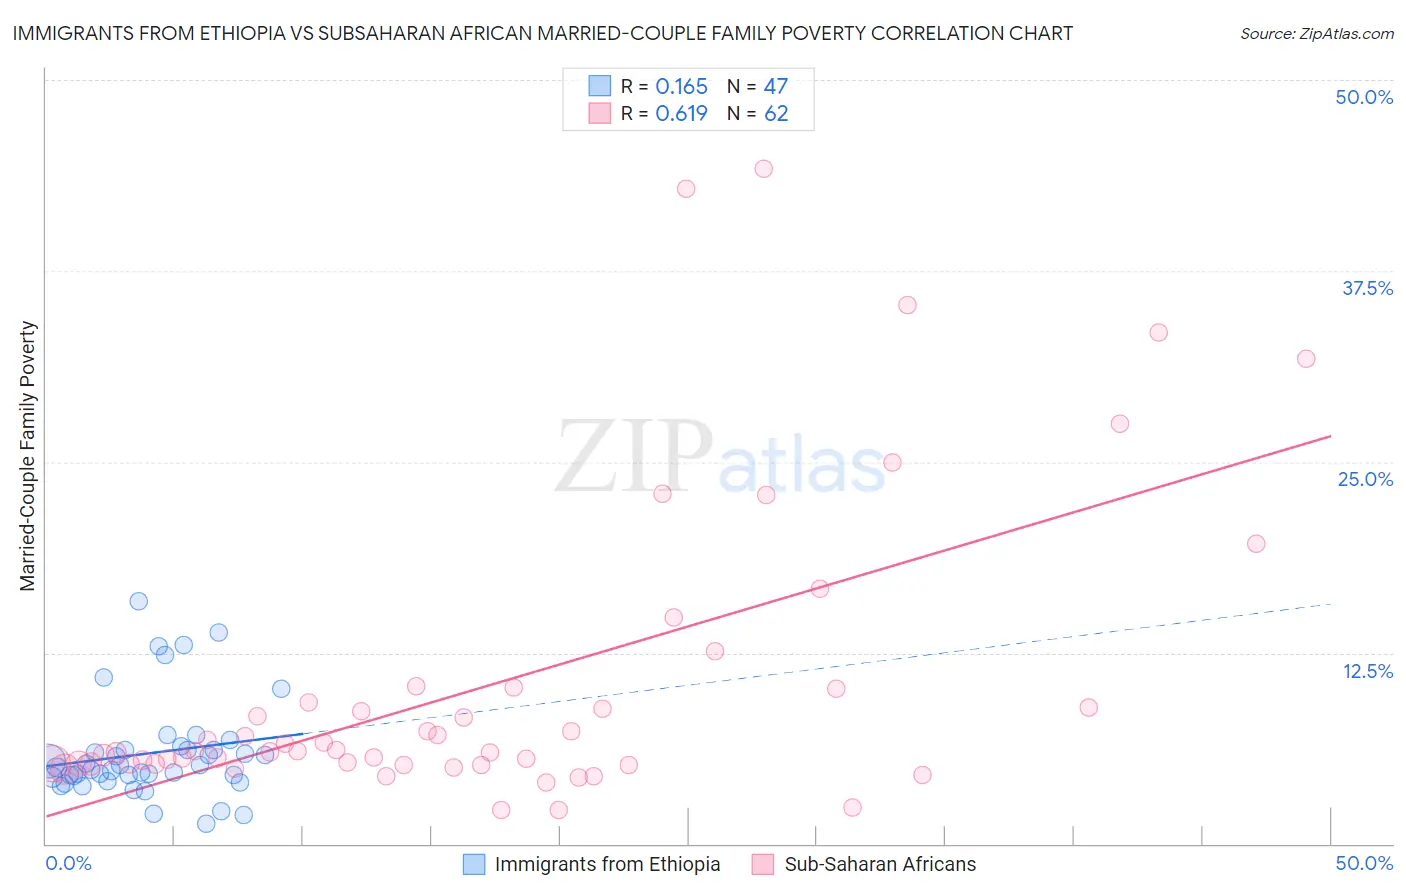 Immigrants from Ethiopia vs Subsaharan African Married-Couple Family Poverty